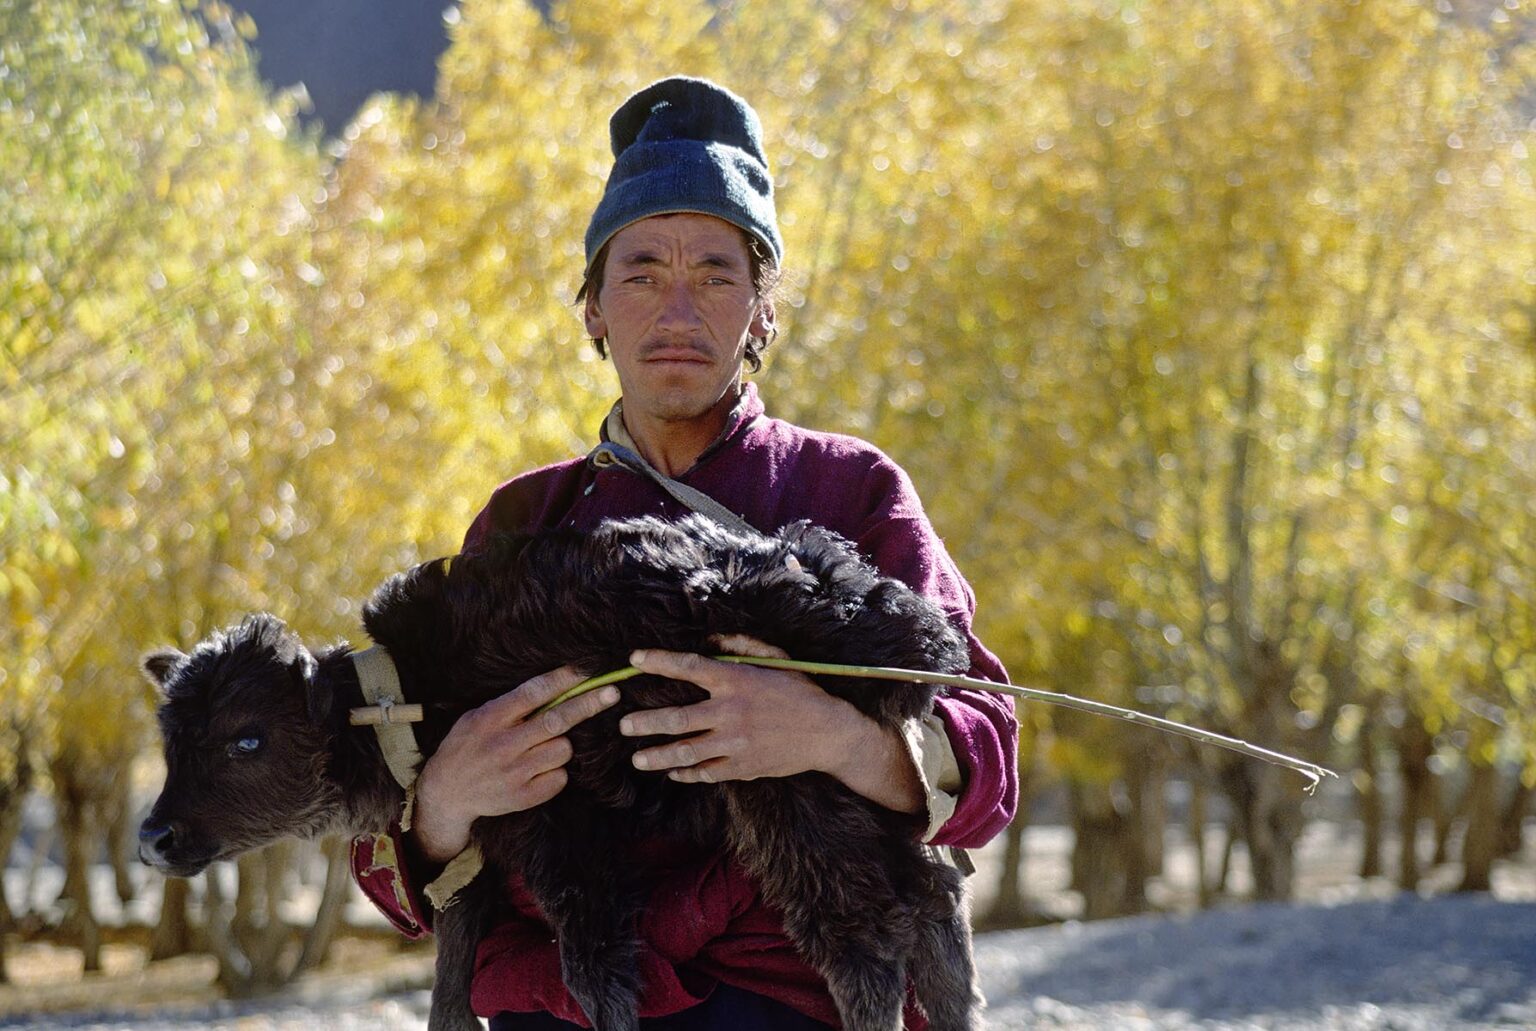 A LADAKHI MAN carries a BABY YAK against a backdrop of AUTUMN COLORS in the HIMALAYAS - LADAKH, INDIA